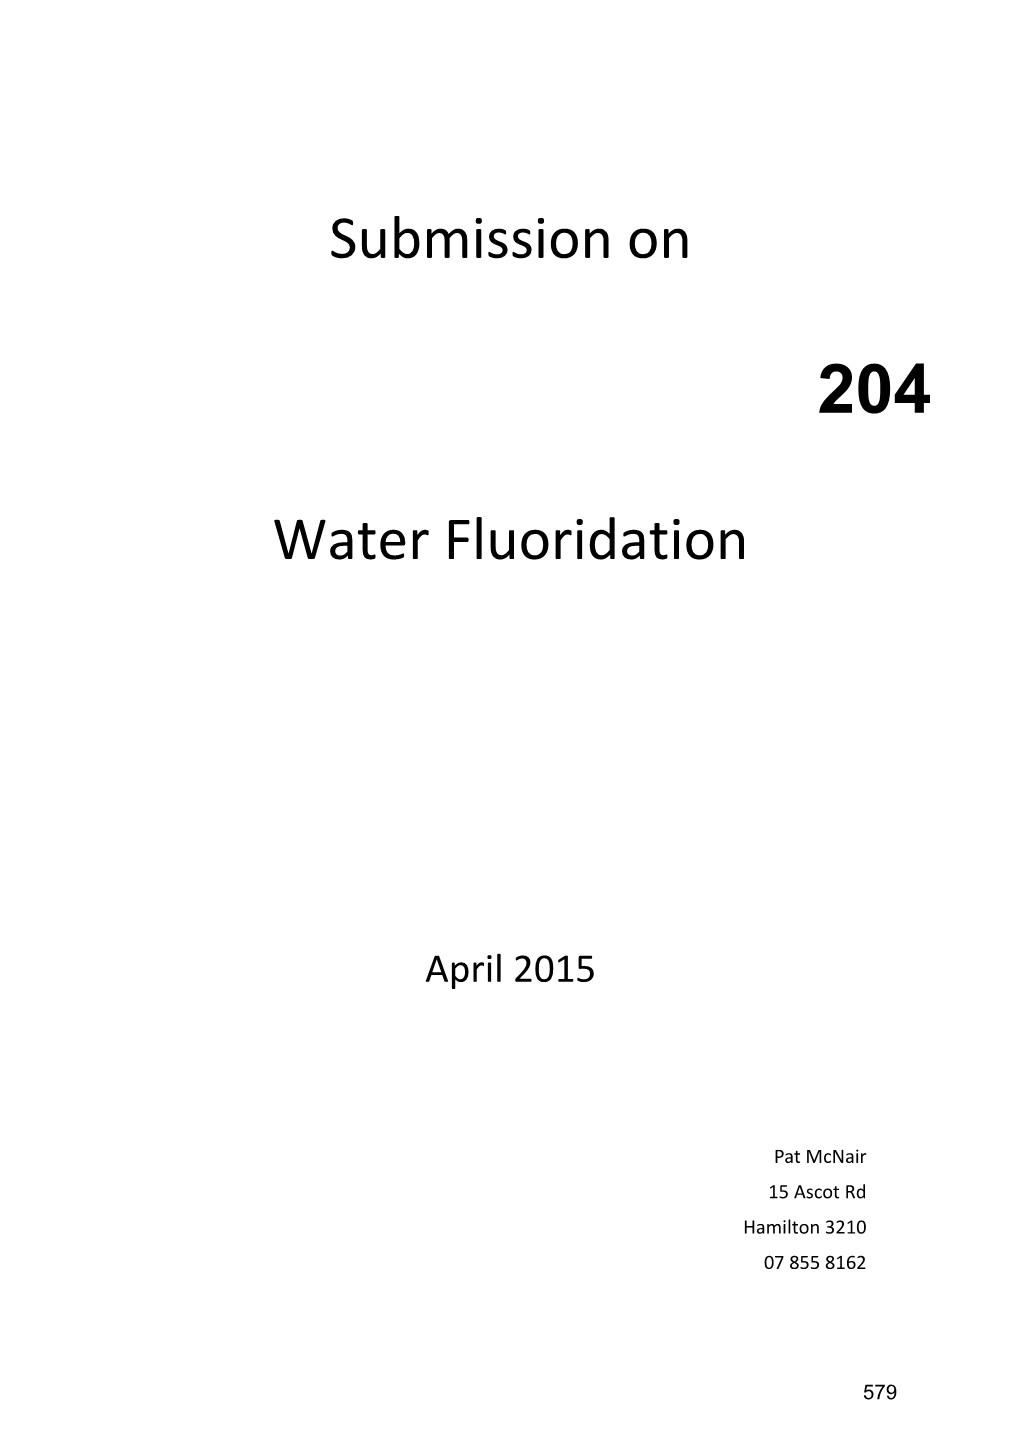 Submission on Water Fluoridation